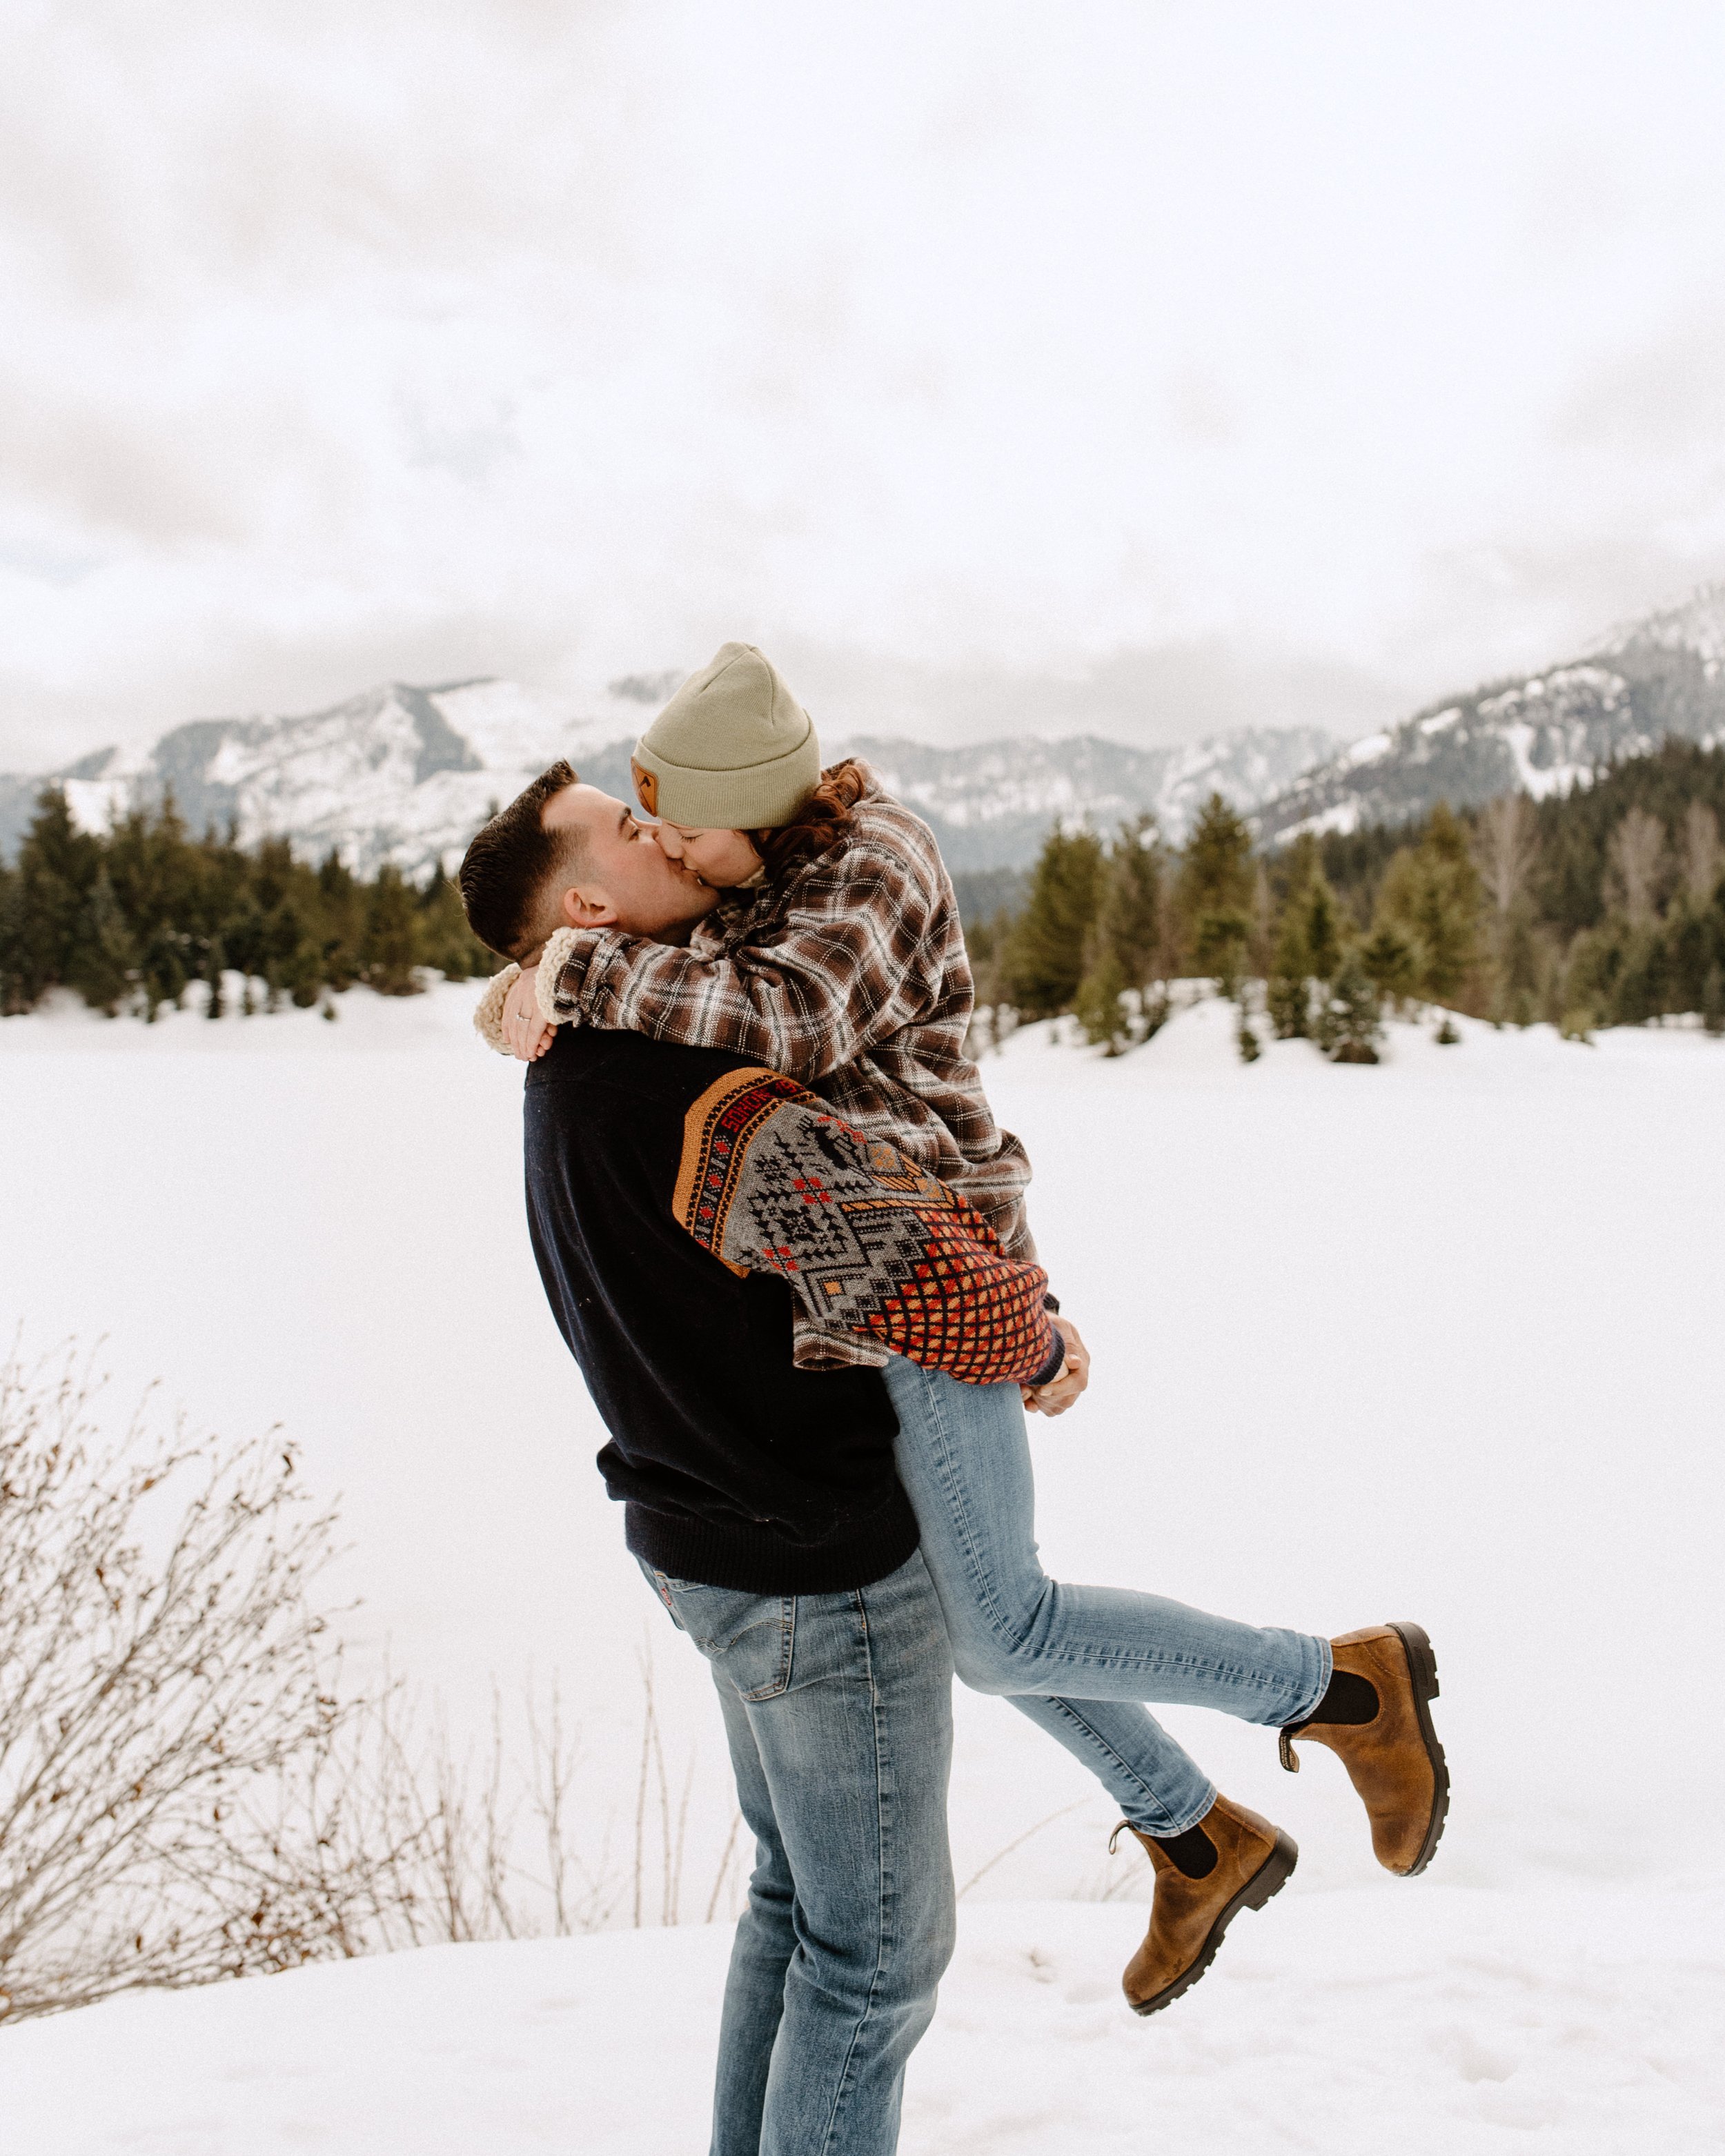 gold_creek_pond_snoqualmie_pass_winter_engagement_session_2.jpg